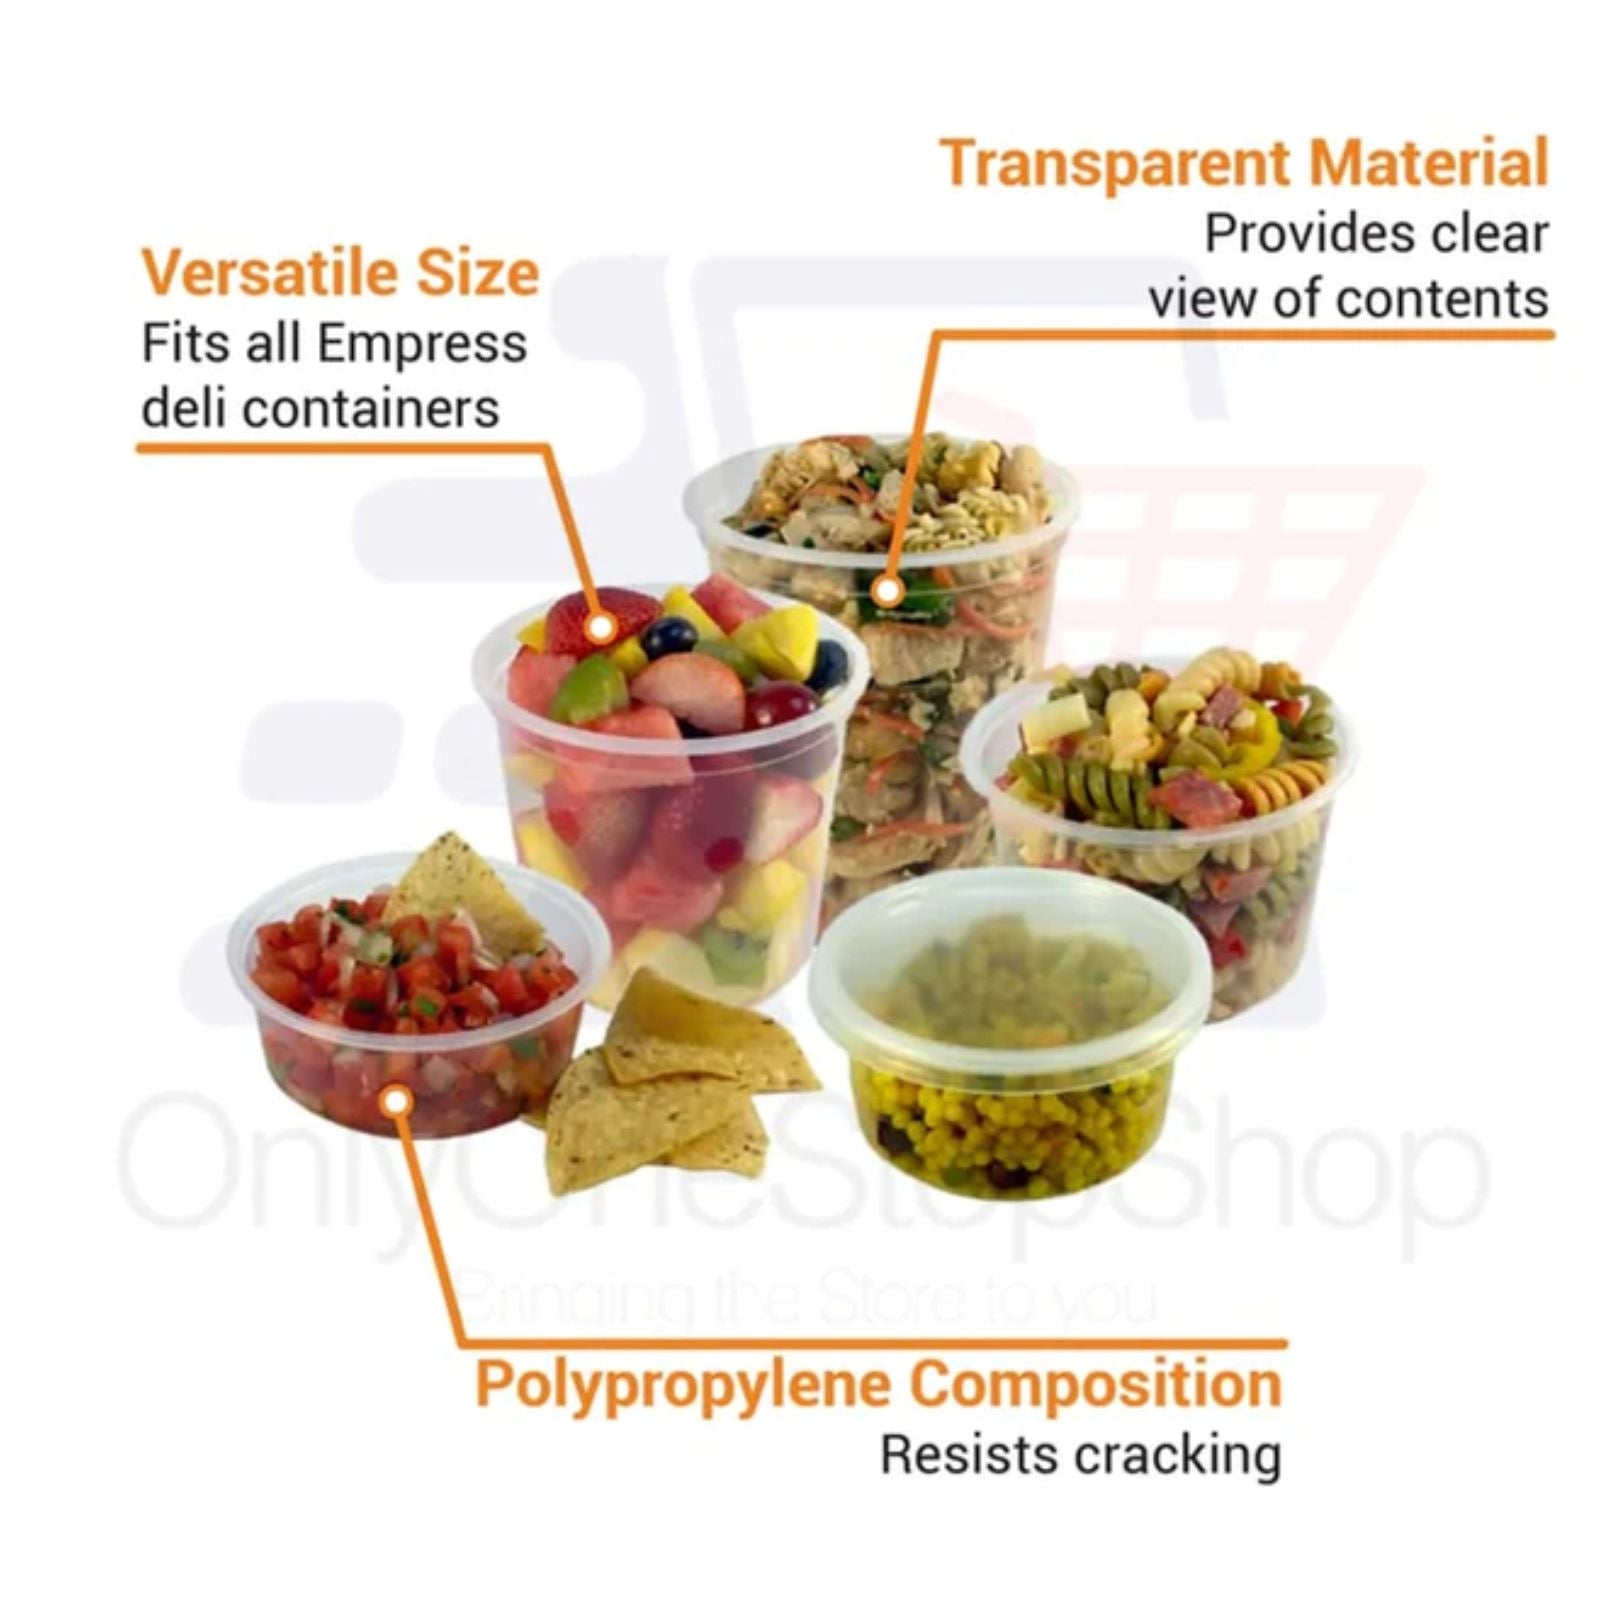 16oz Extra Strong Quality Heavyweight Deli Container with Lids Food Storage & Serving VeZee   